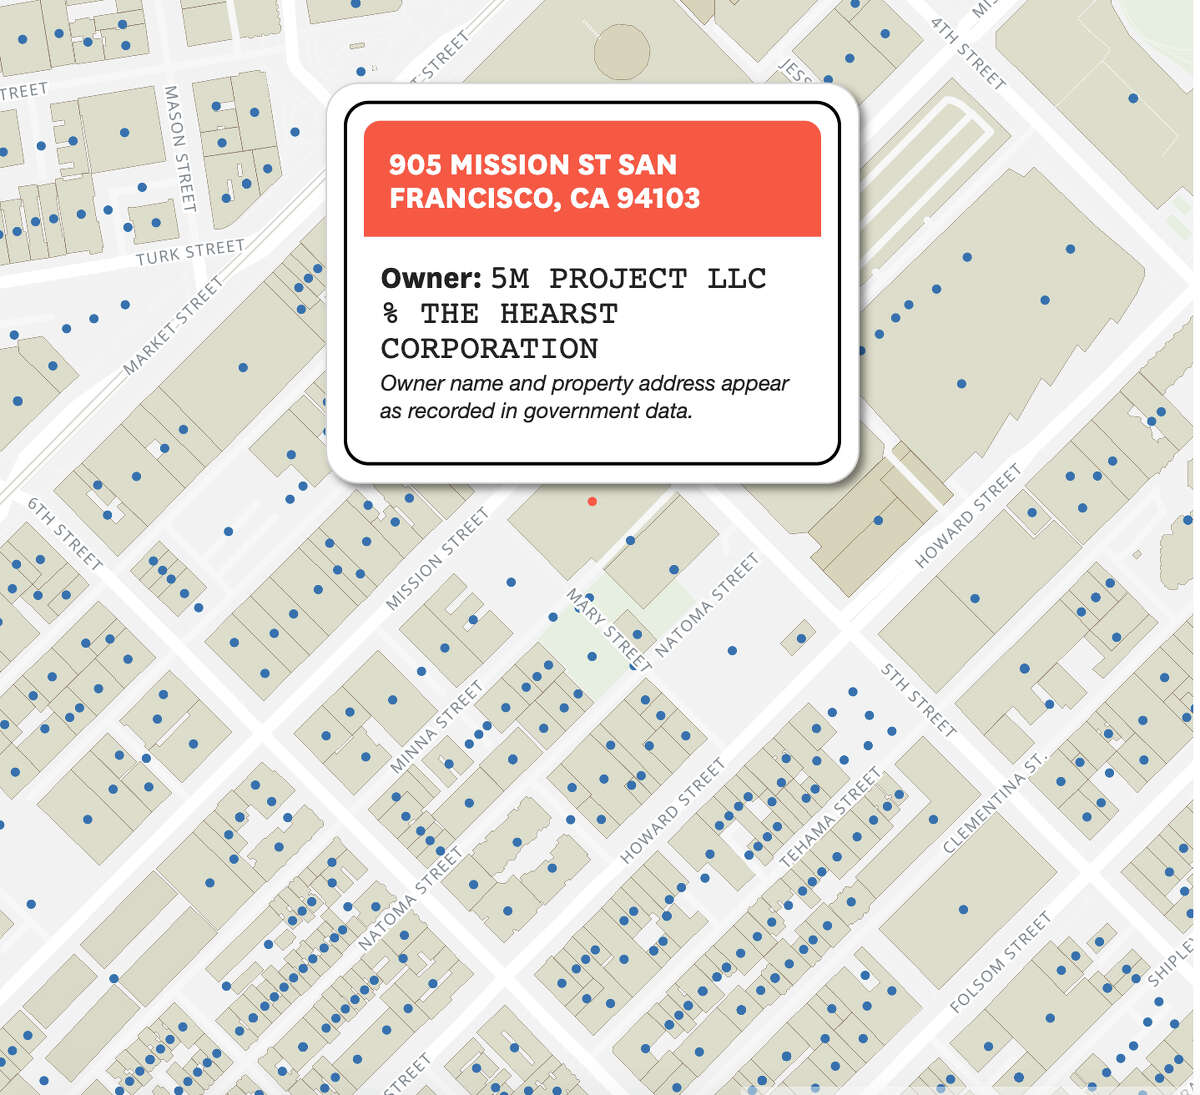 The Chronicle property ownership map shows ownership records for 2.3 million Bay Area properties.